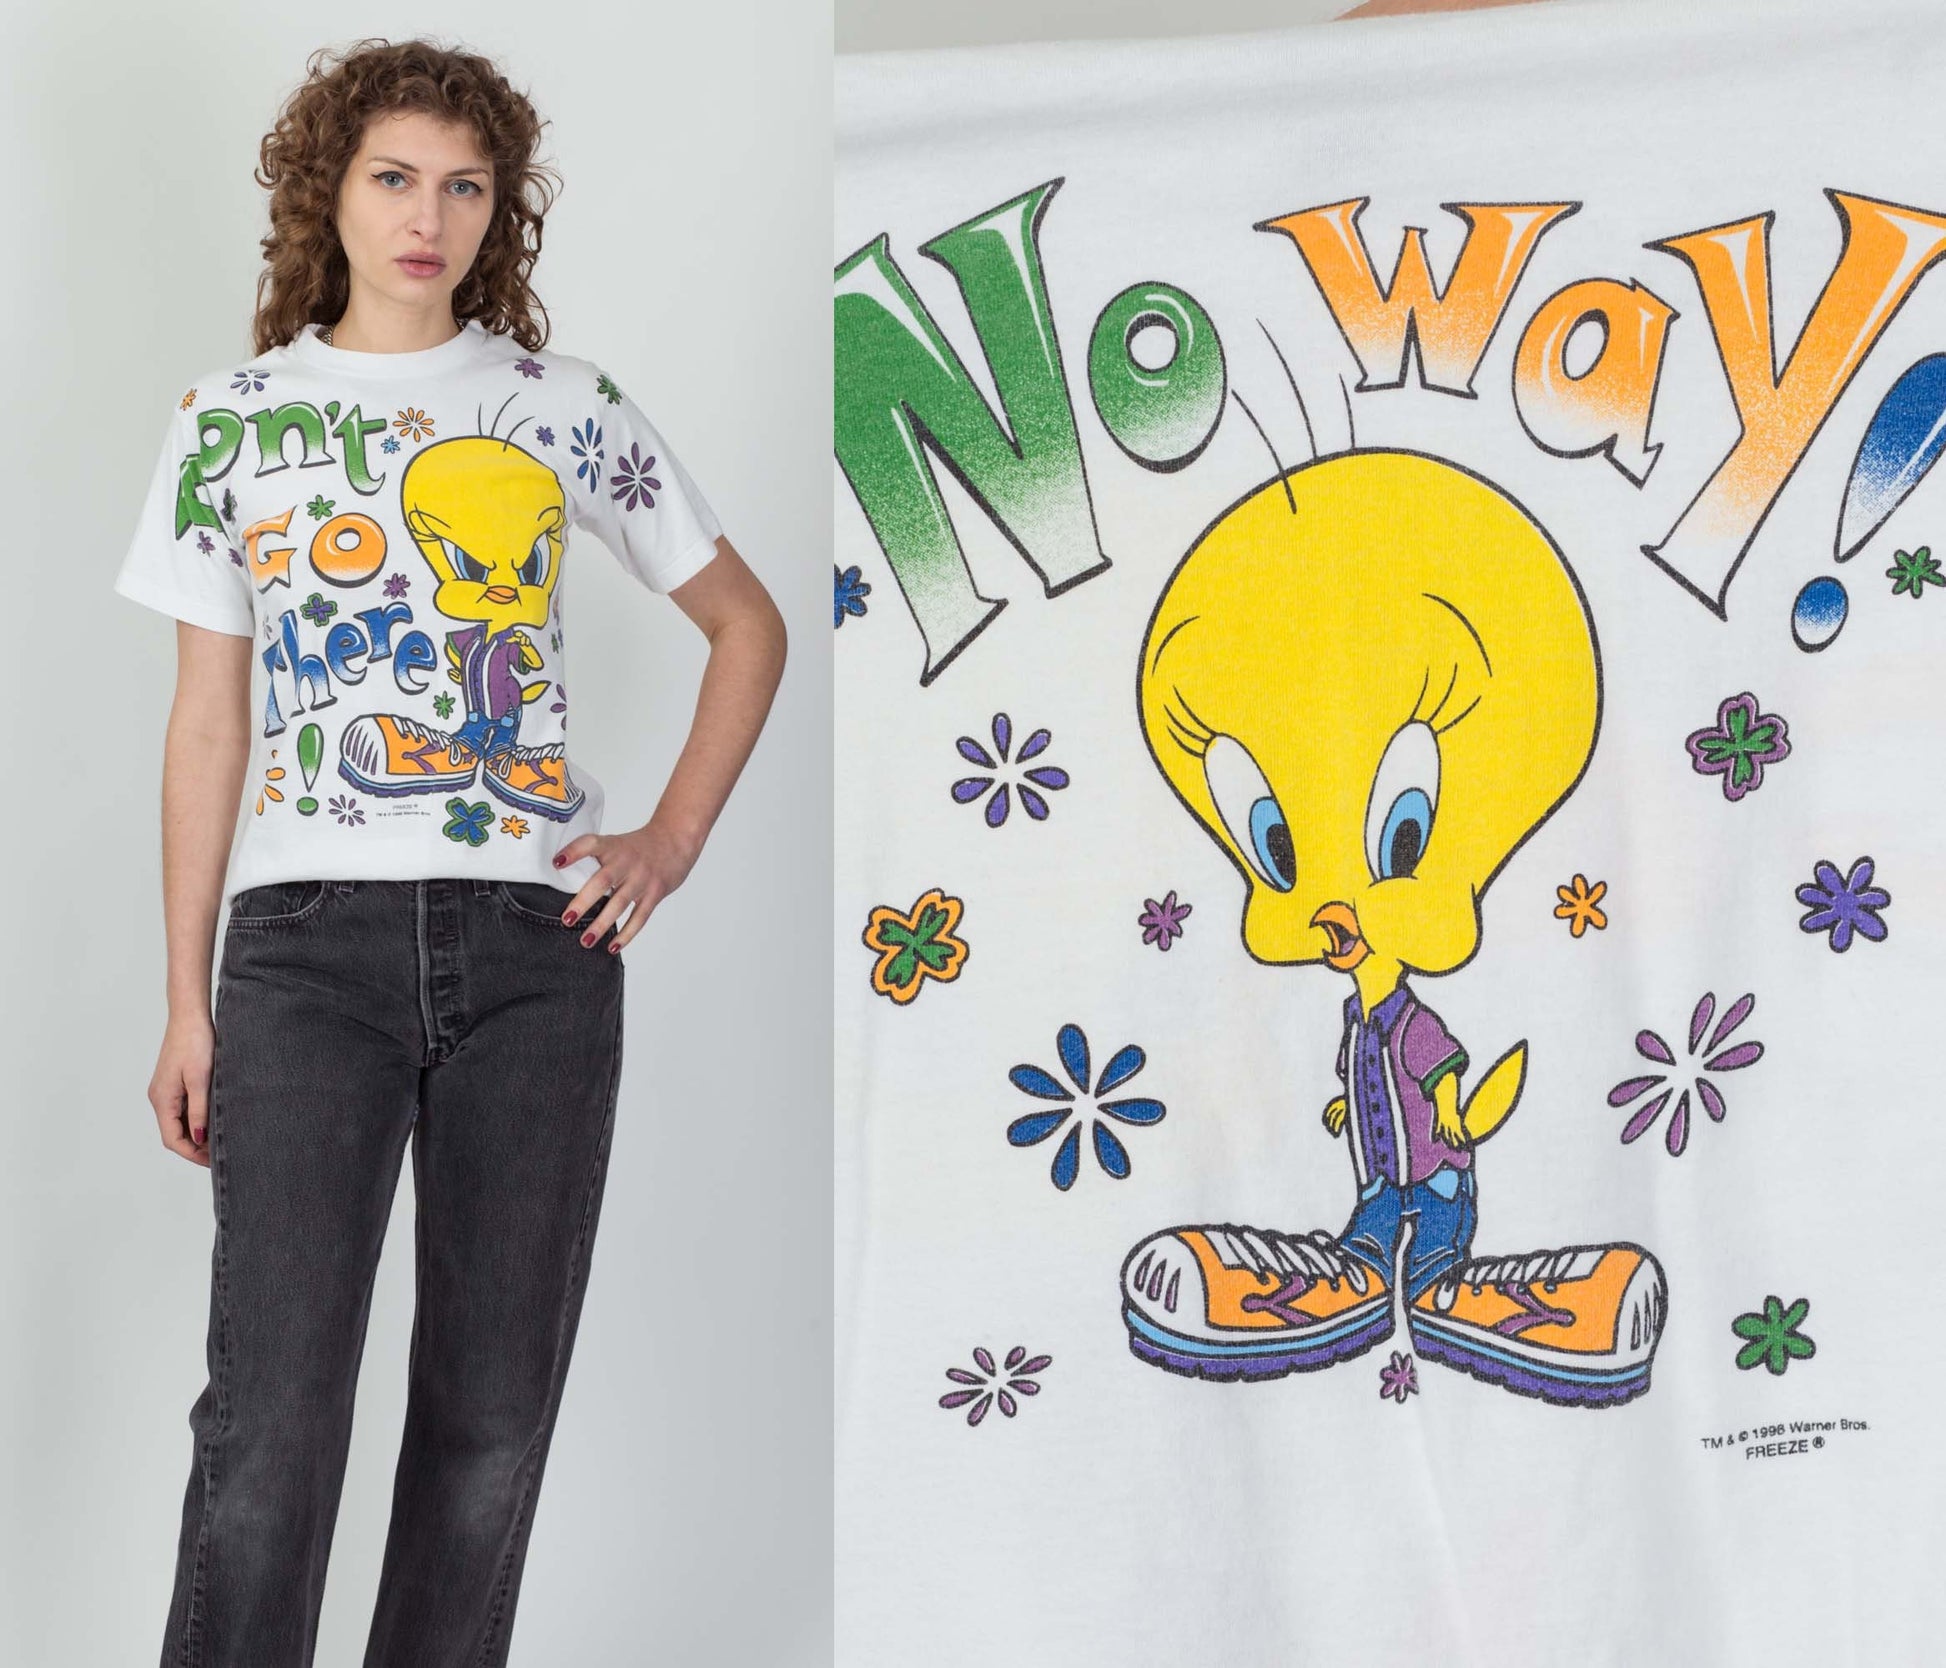 90s Tweety Bird "Don't Go There!" T Shirt - Small 